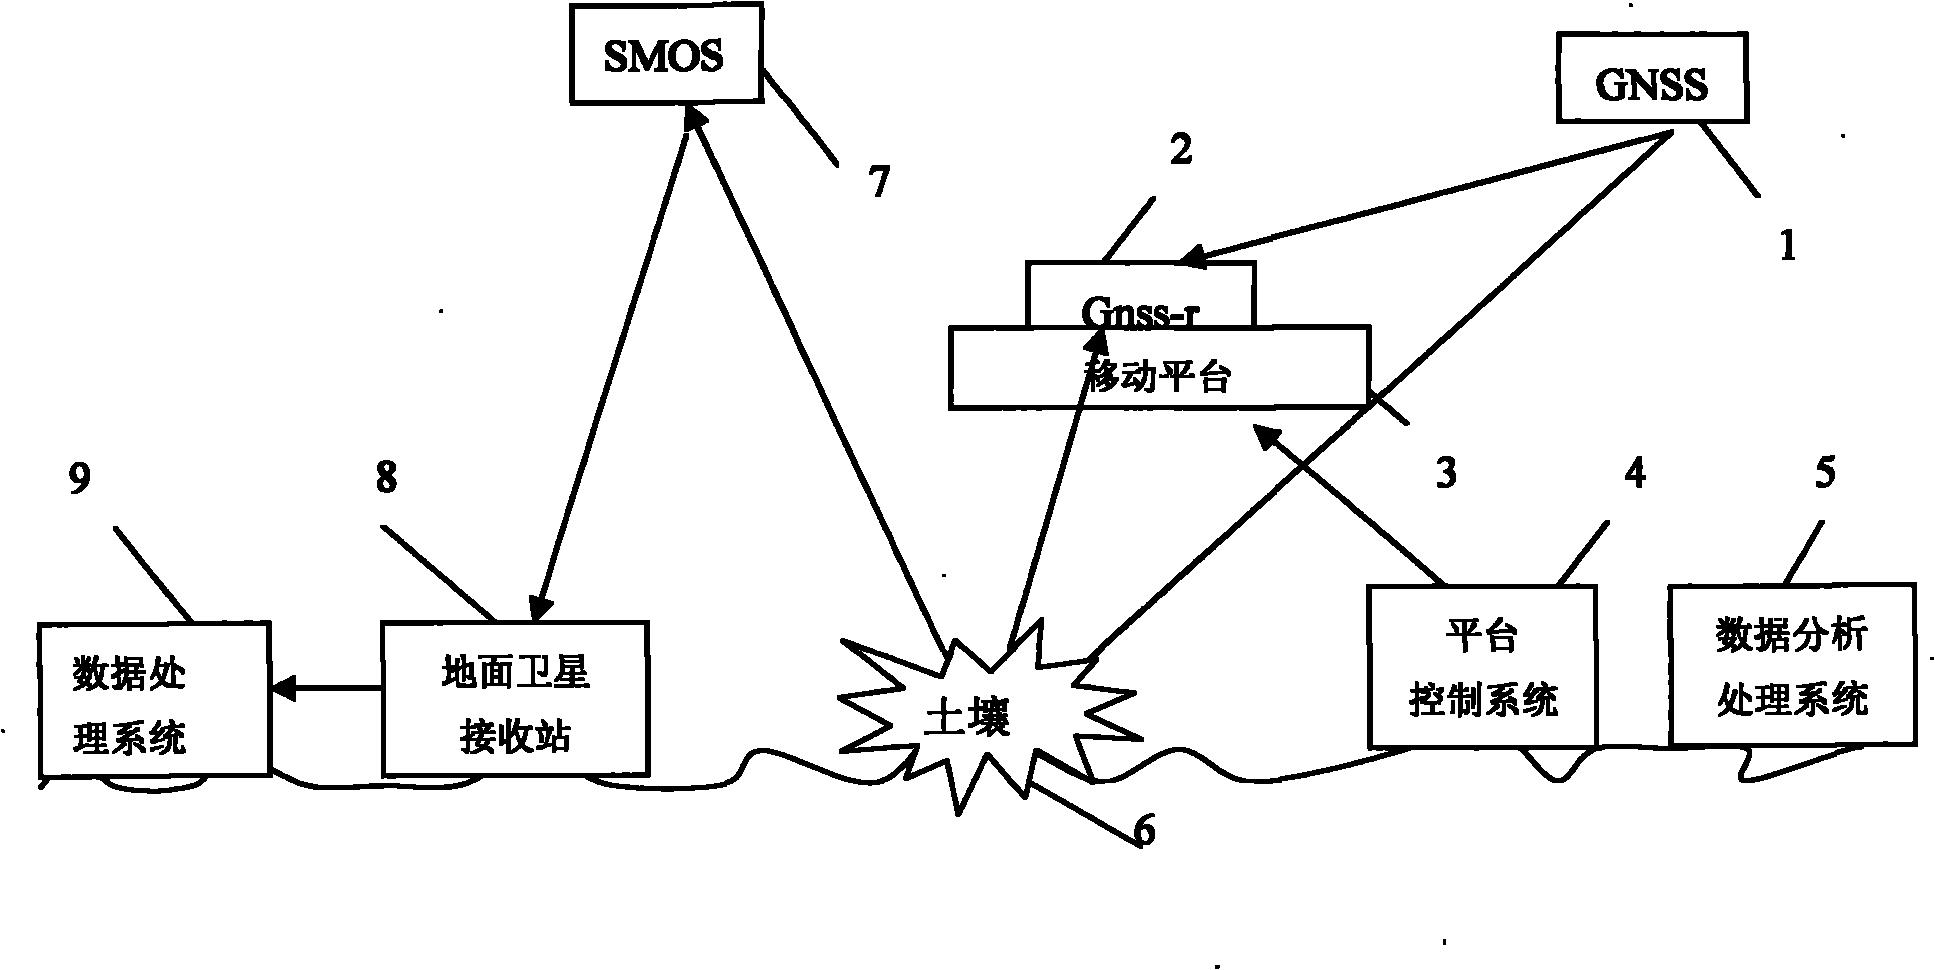 Microwave remote sensing soil moisture monitoring system and method thereof